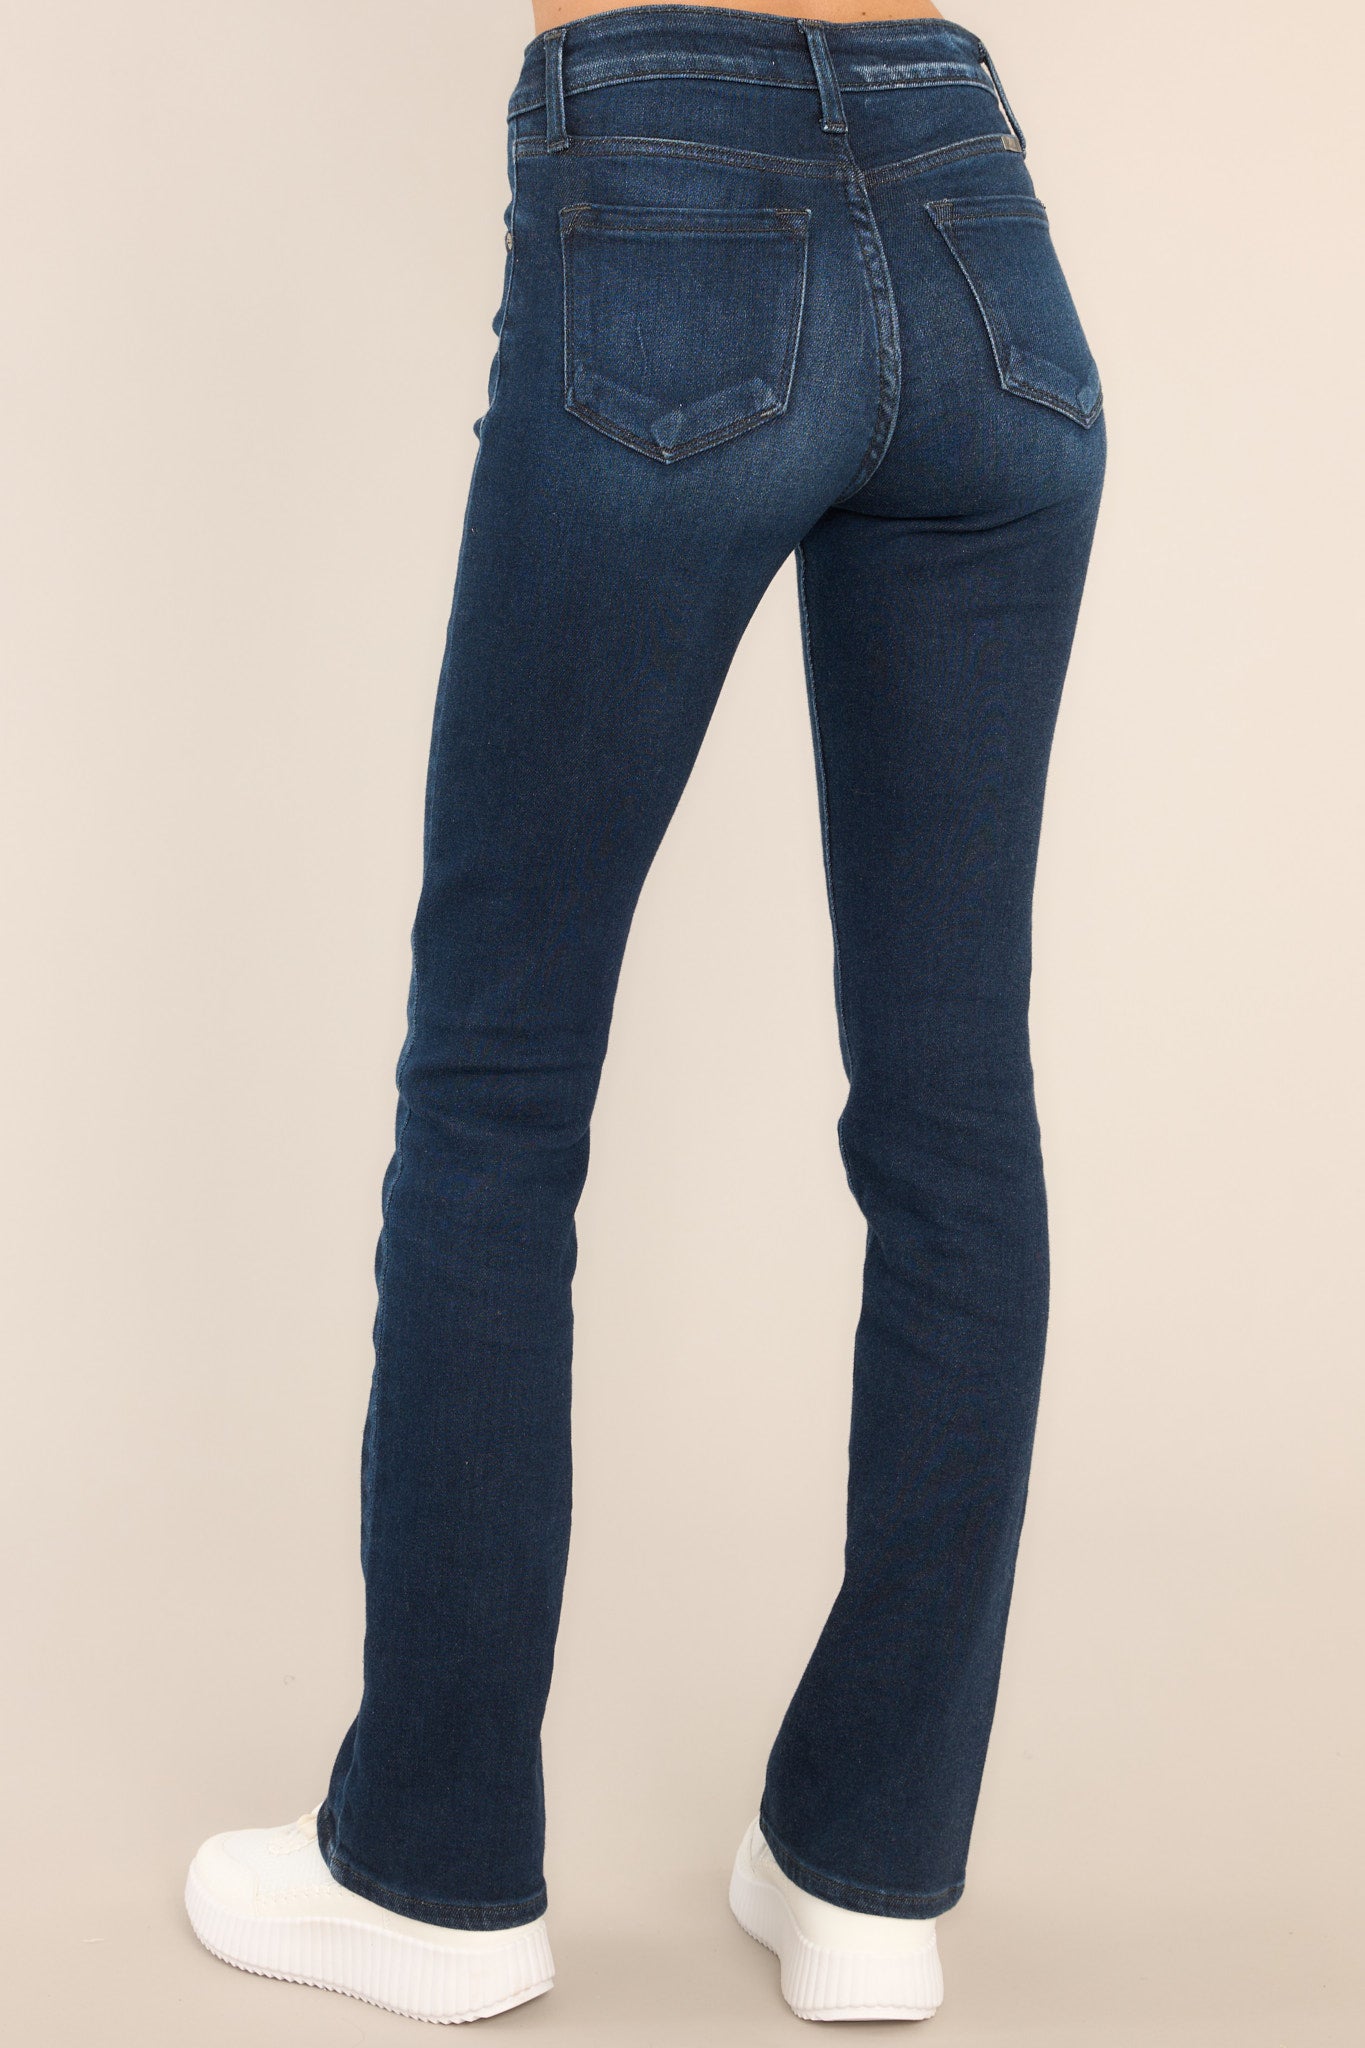 Back view of these jeans that feature a skinny jean style a high waist, 5 pocket detailing, belt loops, and a zipper button closure.